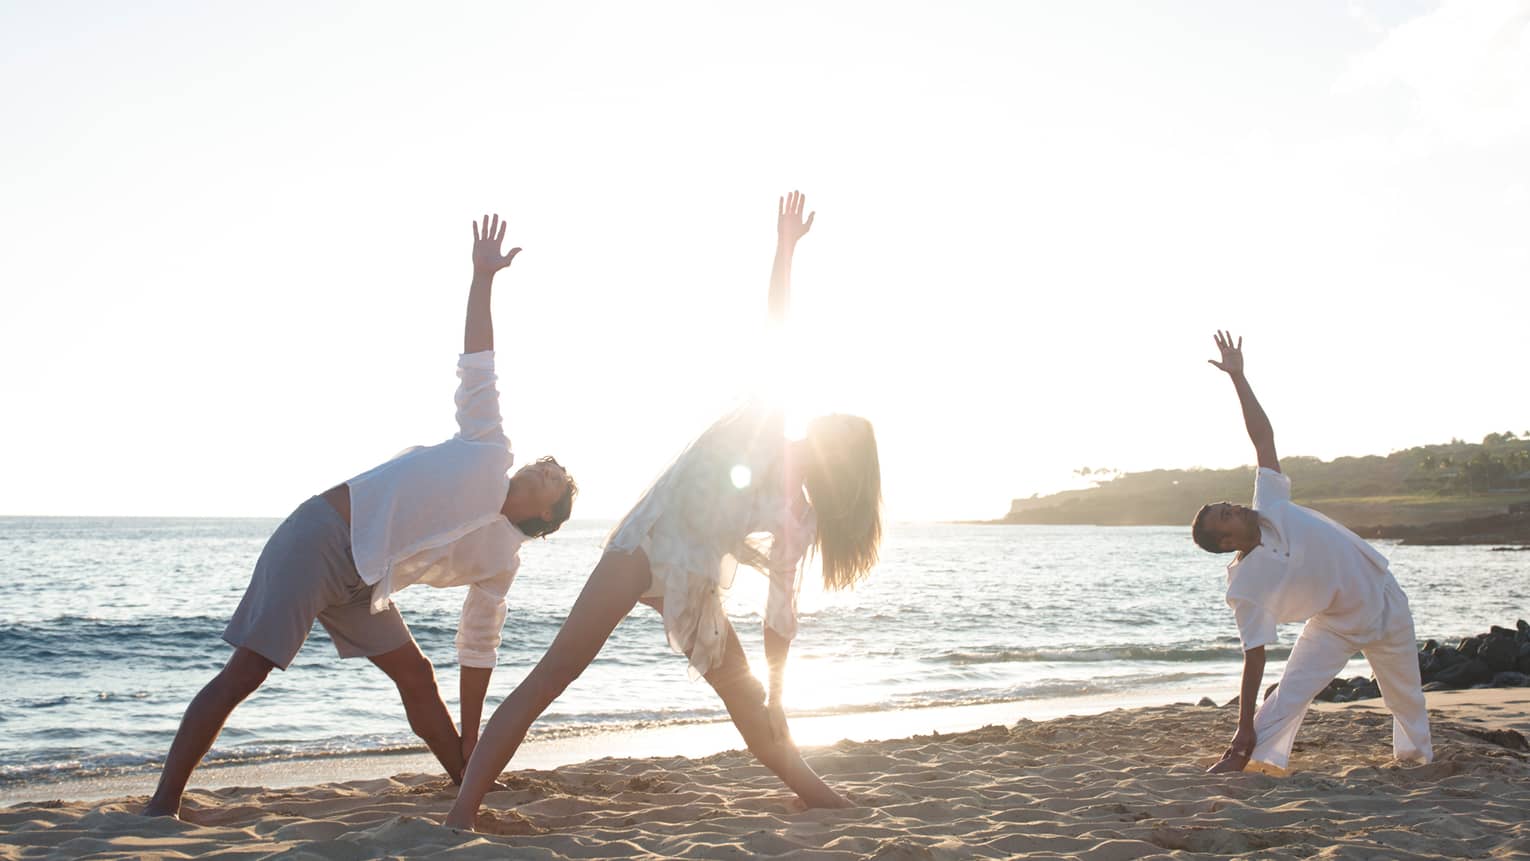 Three people stretch in yoga pose on sand beach at sunrise